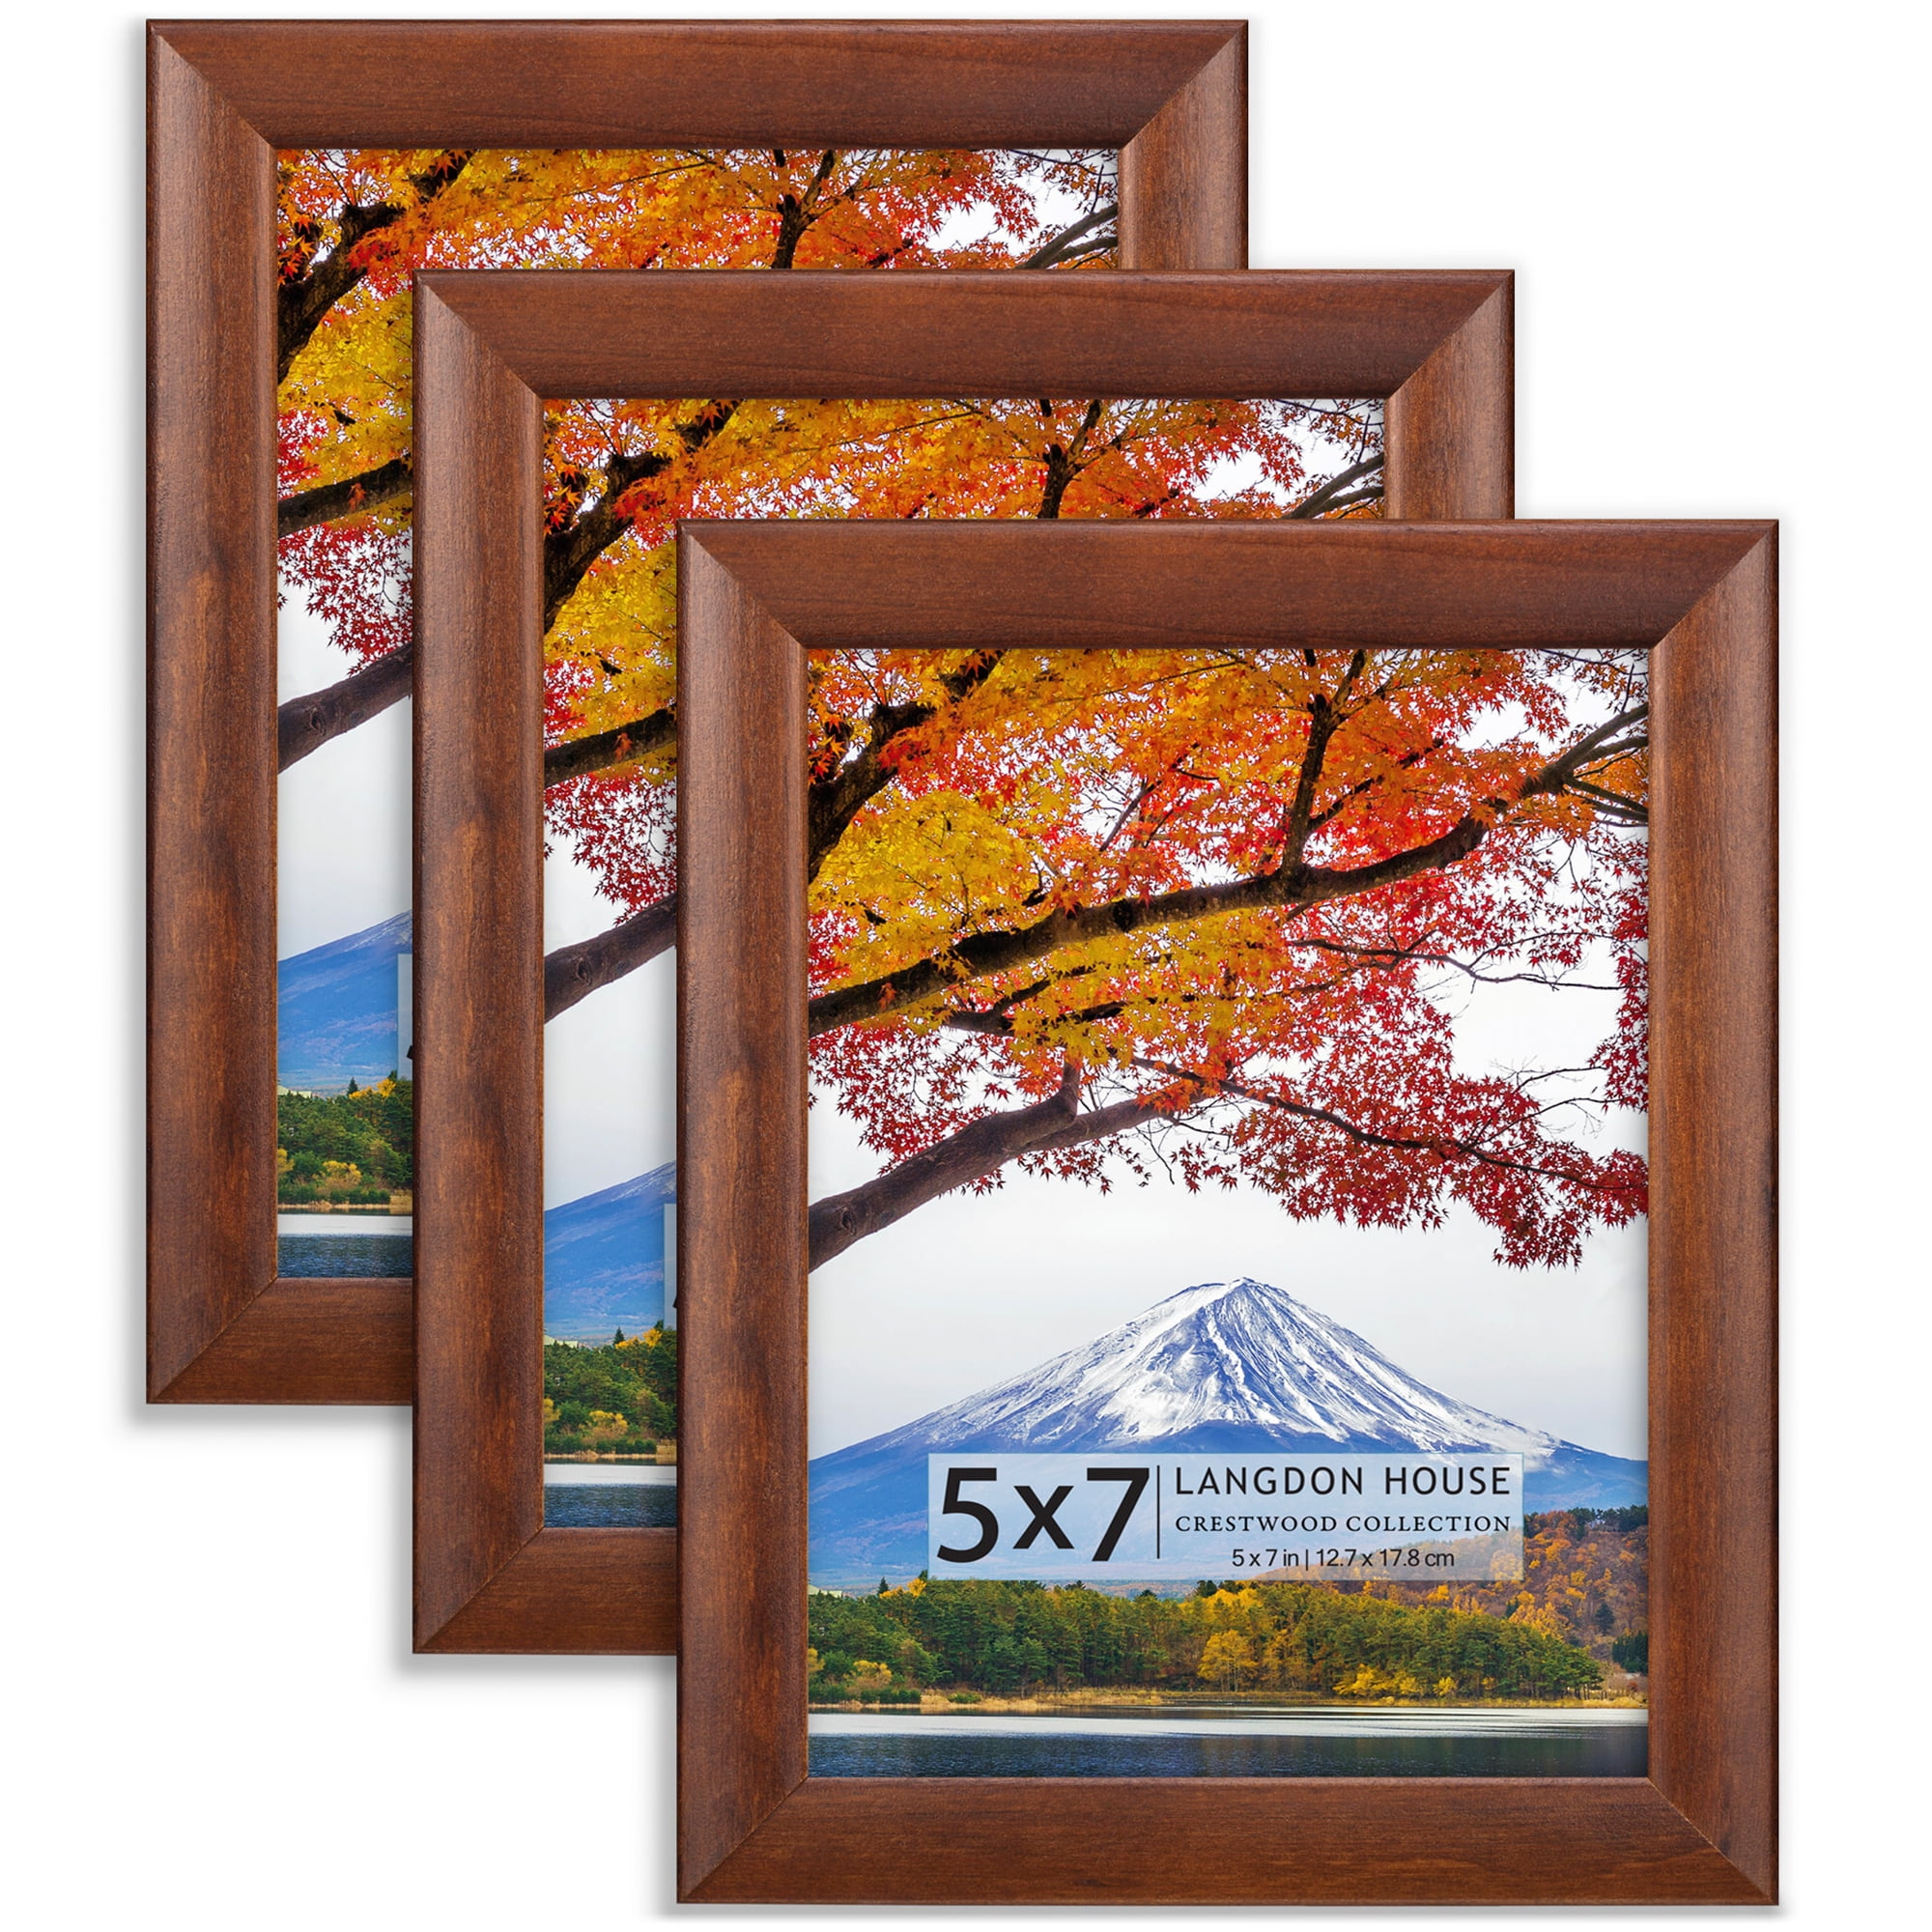  Langdon House Picture Frame Glass Replacements (Crystal Clear,  5x7, 3 Pack) High-Definition Glass Sheet : Arts, Crafts & Sewing